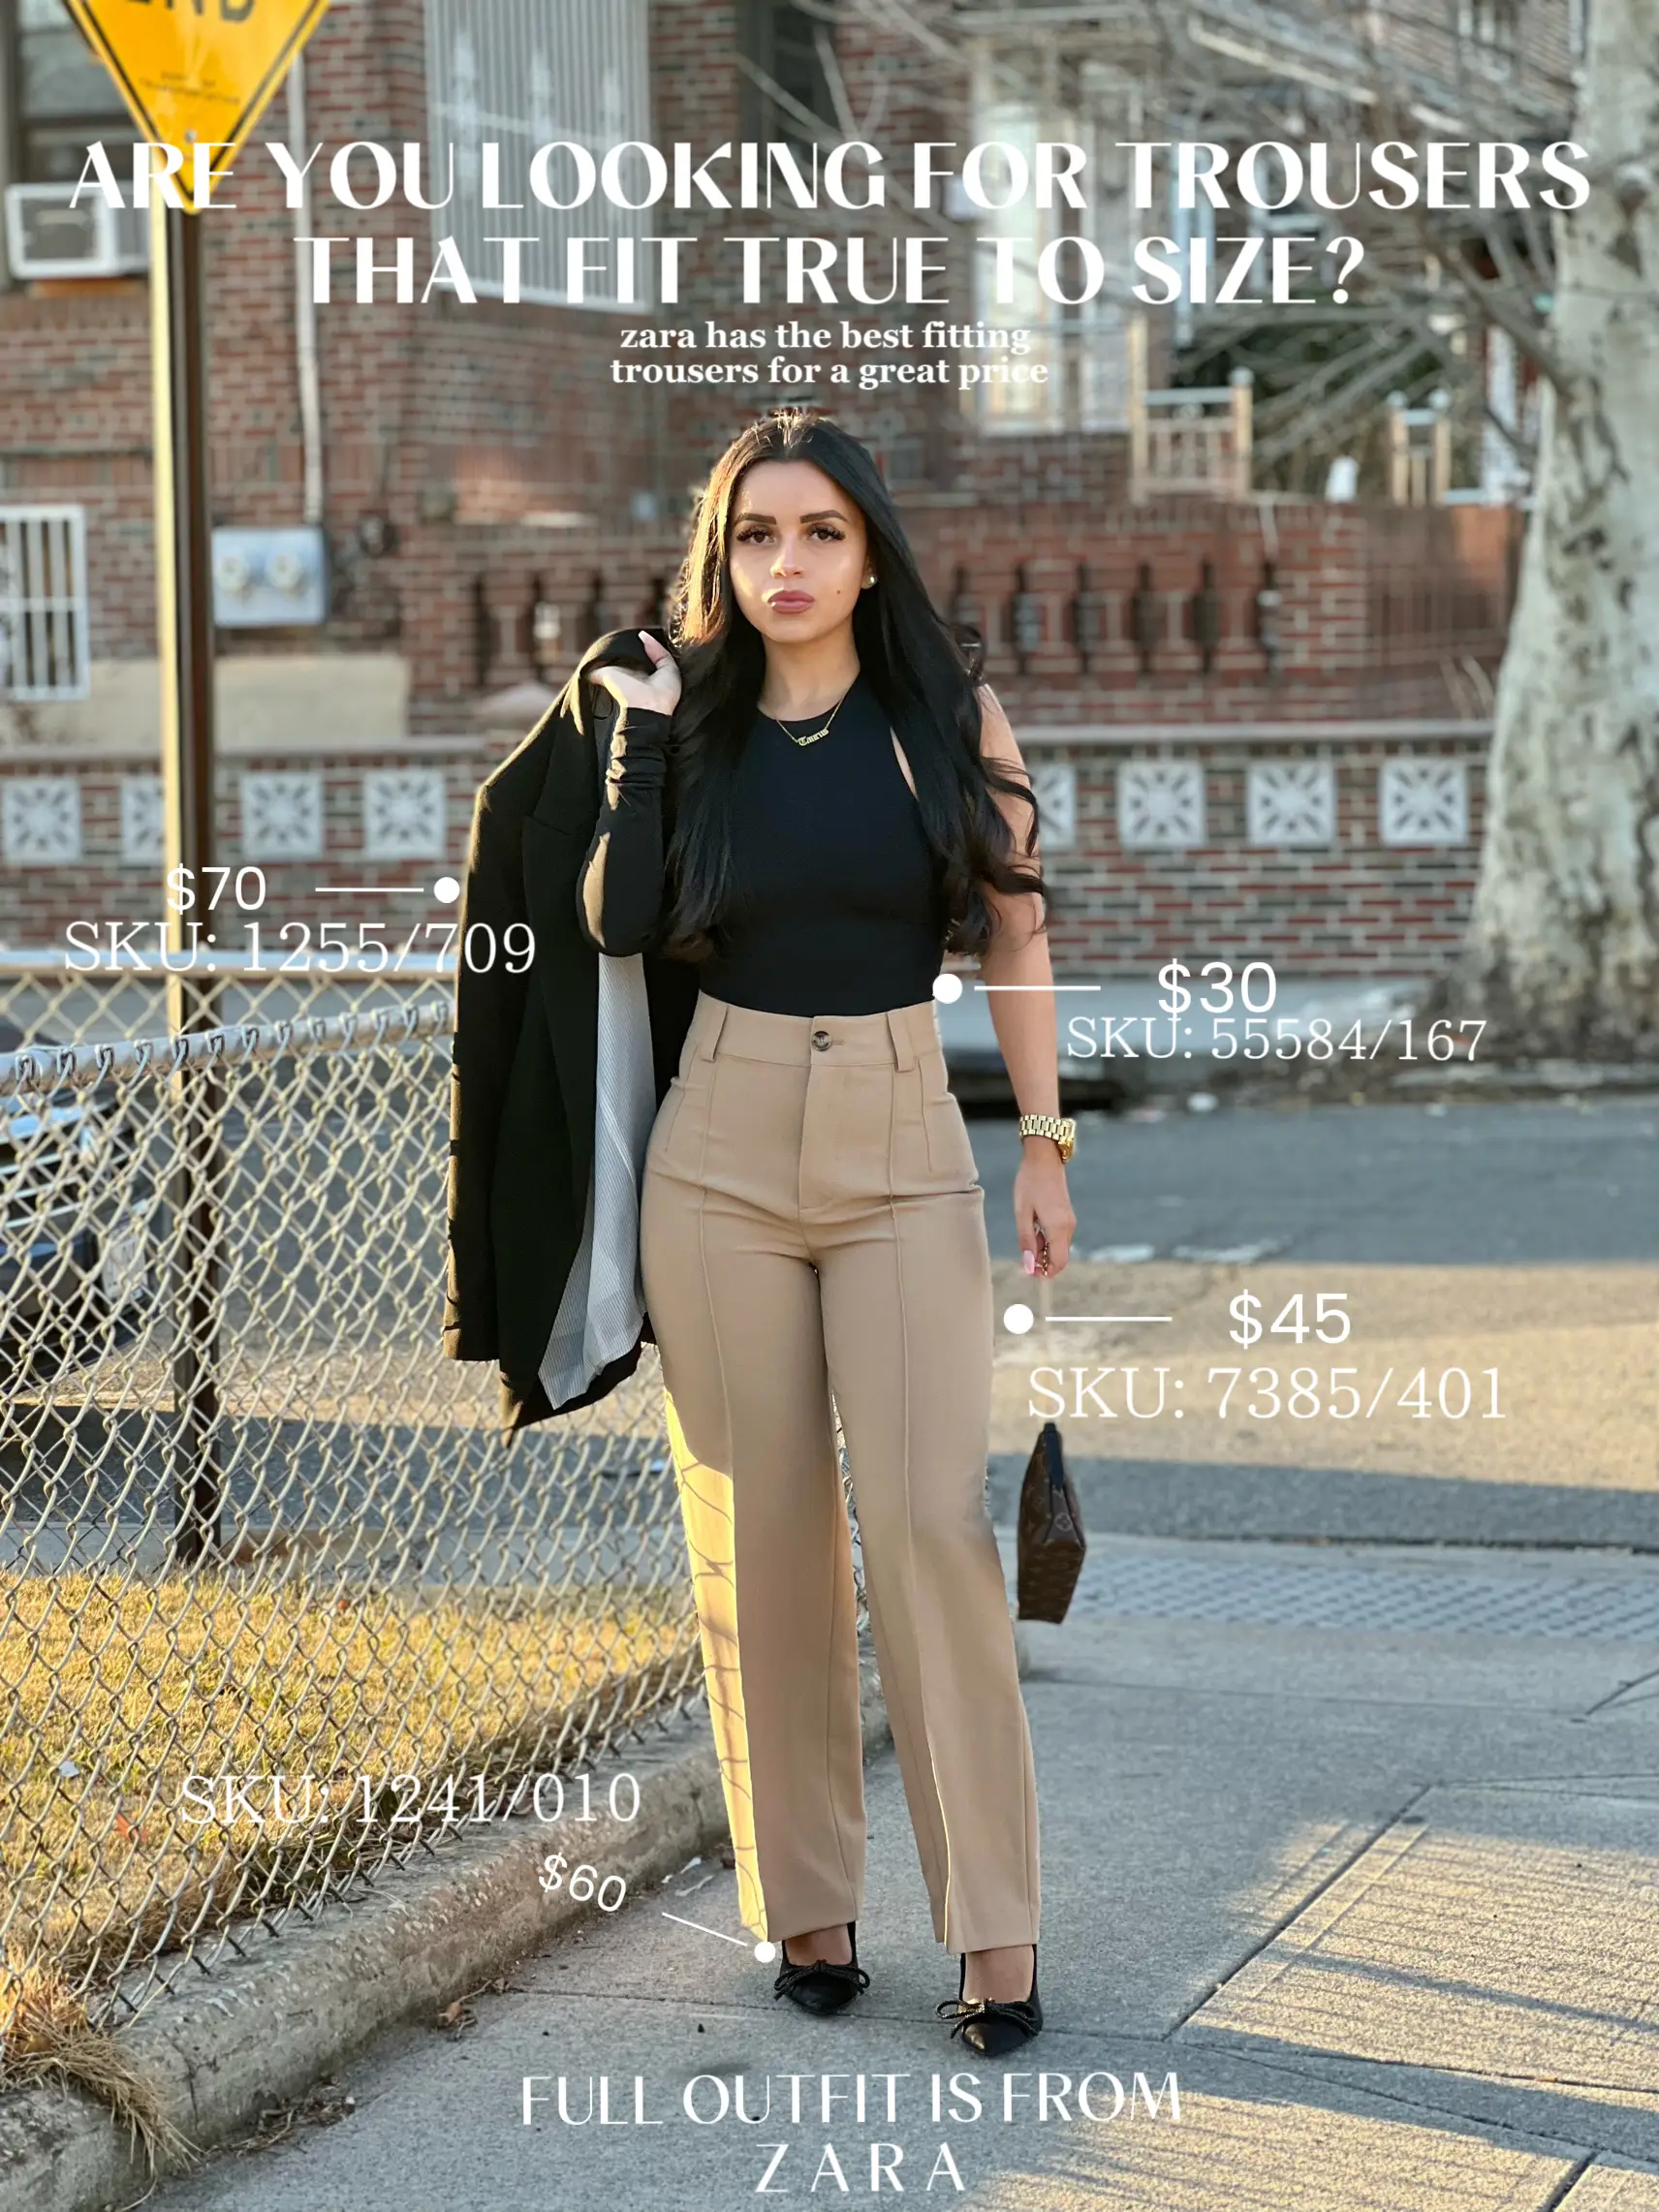 ZARA High Waisted Faux Leather Leggings Camel XS - $40 - From Laura